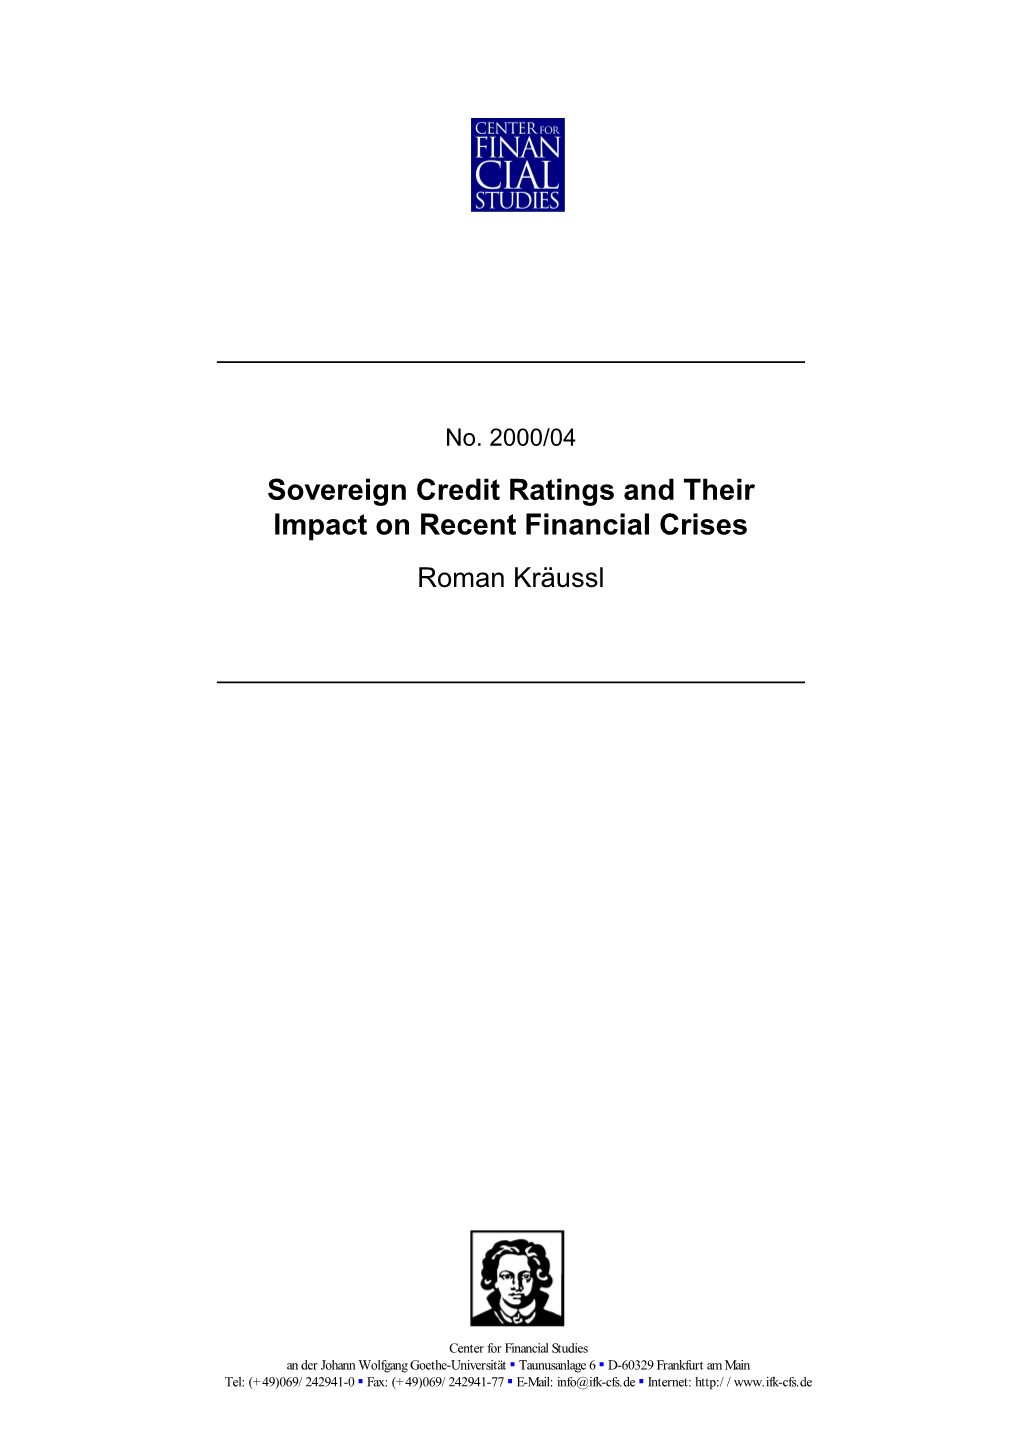 Sovereign Credit Ratings and Their Impact on Recent Financial Crises Roman Kräussl